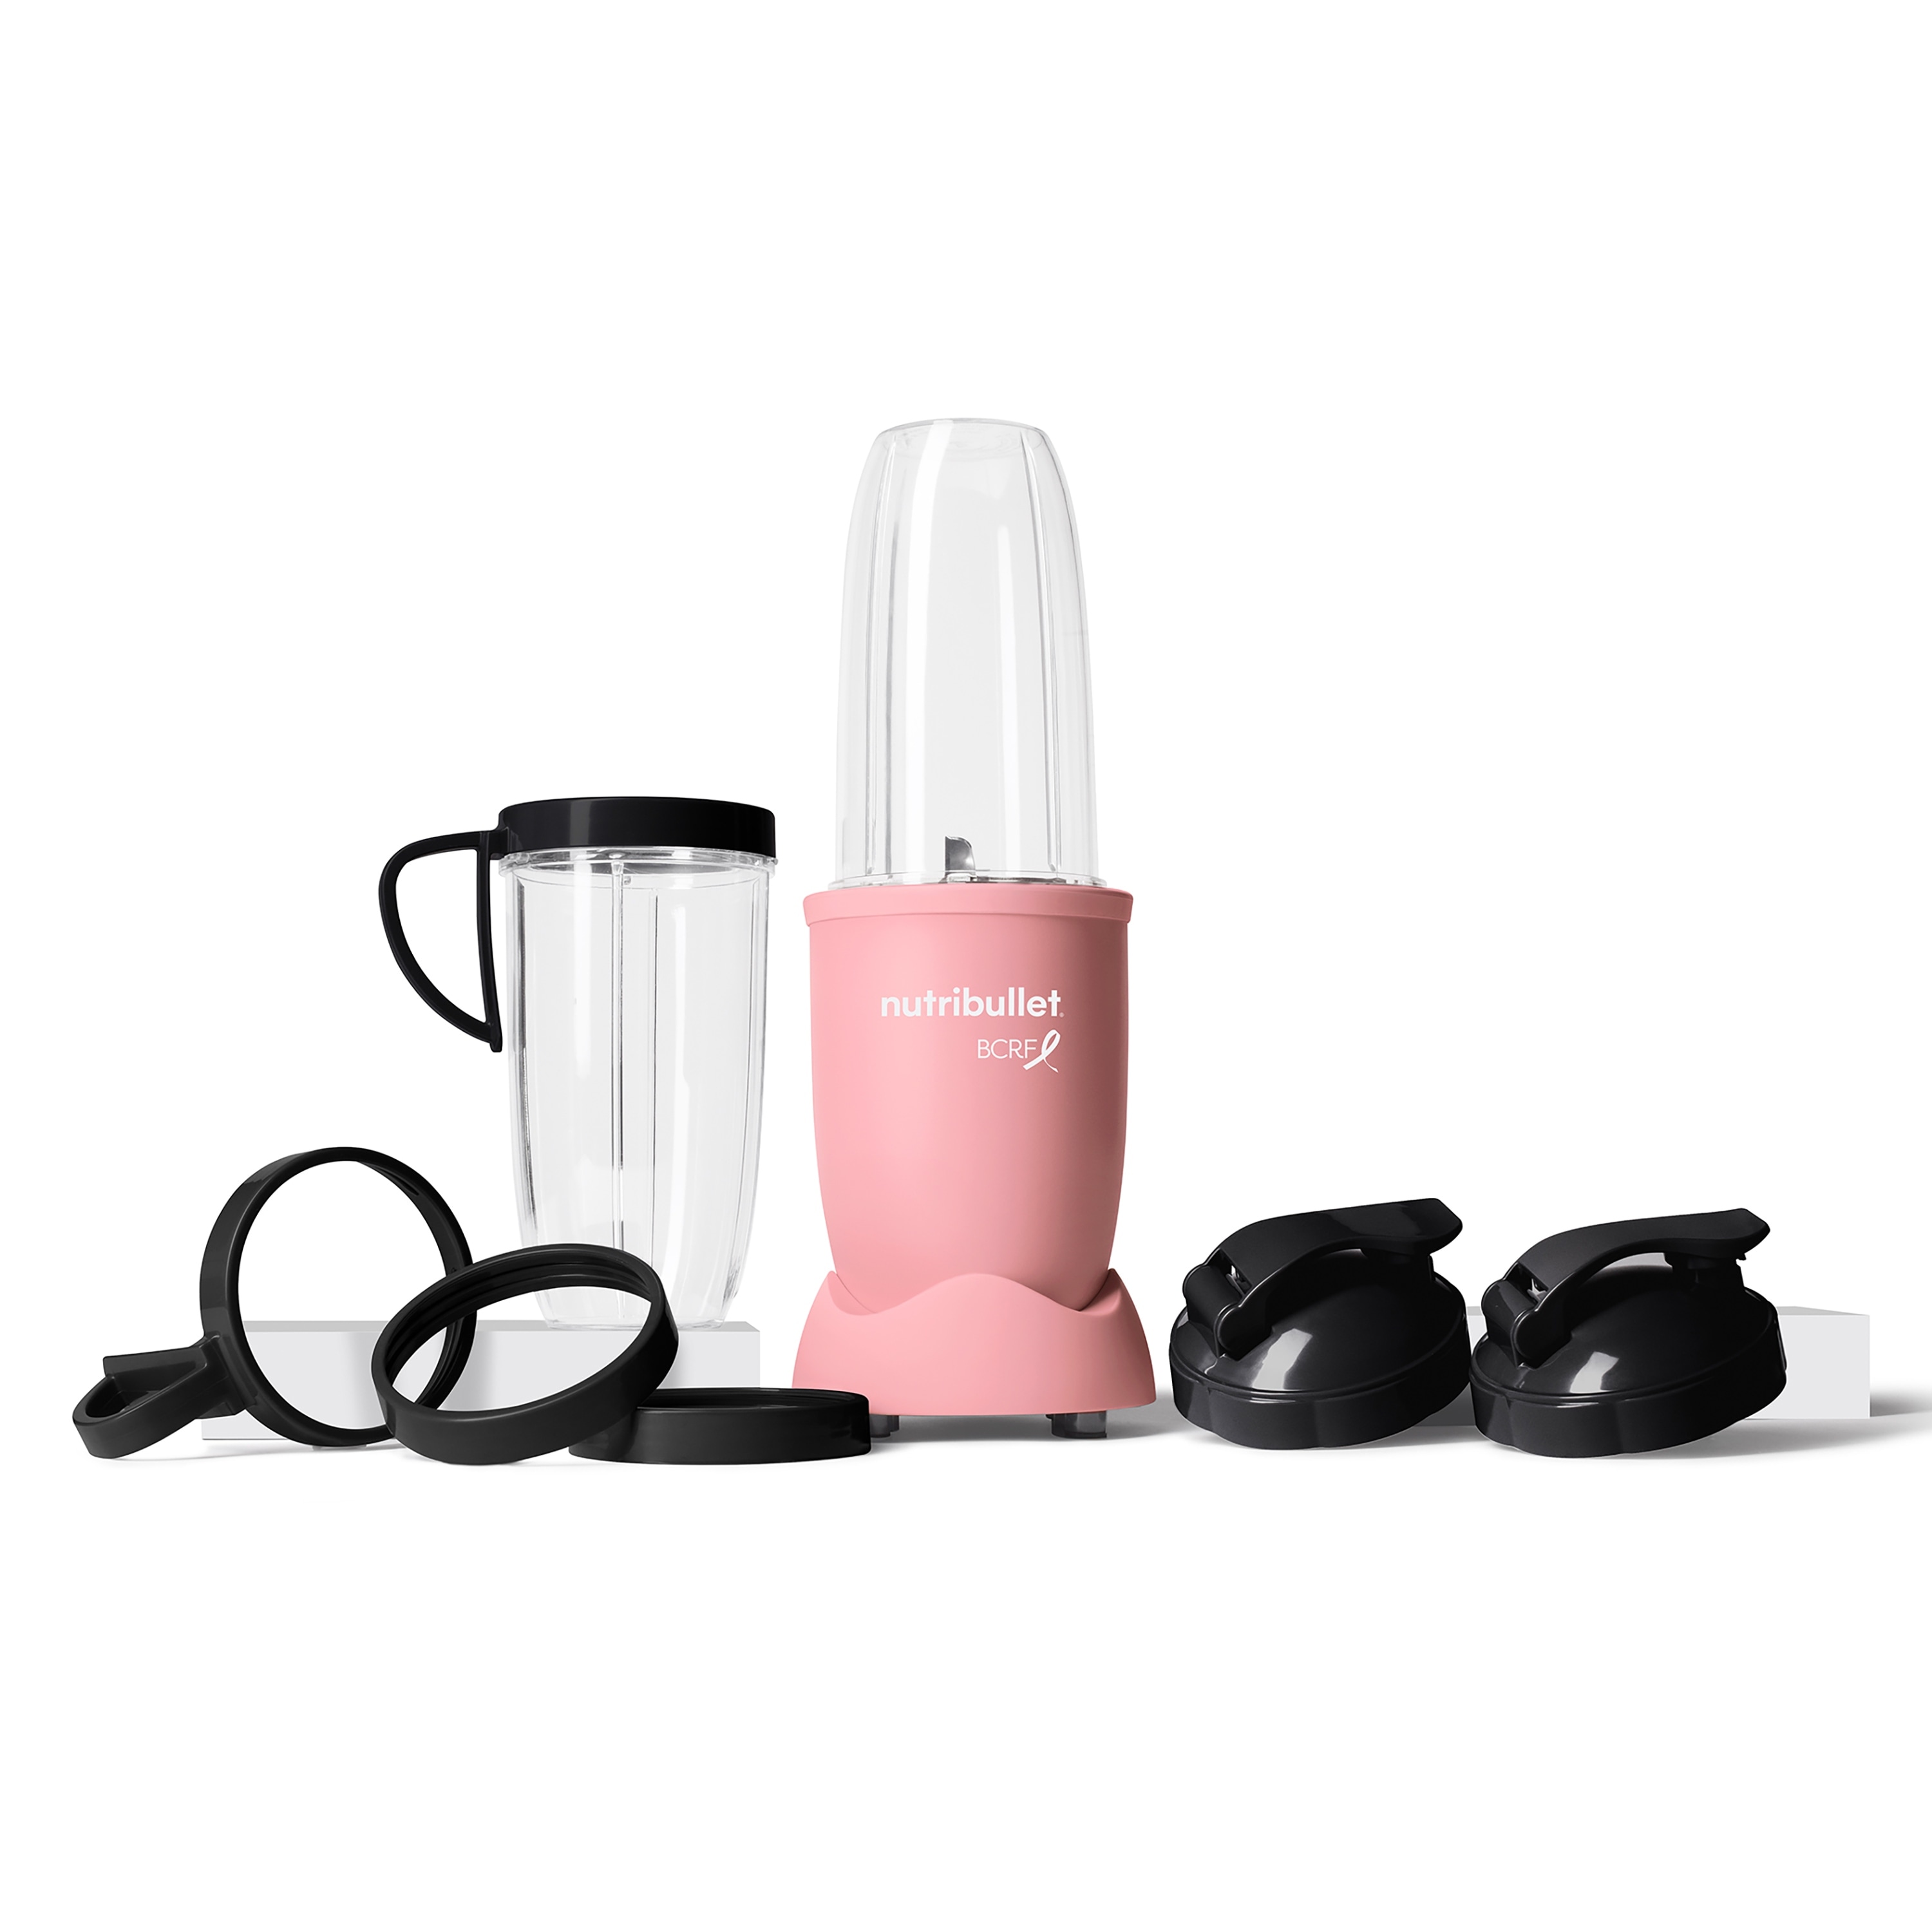 https://ak1.ostkcdn.com/images/products/is/images/direct/c8f911f53822329c710c1533417a017b9936319c/Nutribullet-PRO-BCRF-Exclusive%2C-12pc.-Matte-Soft-Pink.jpg